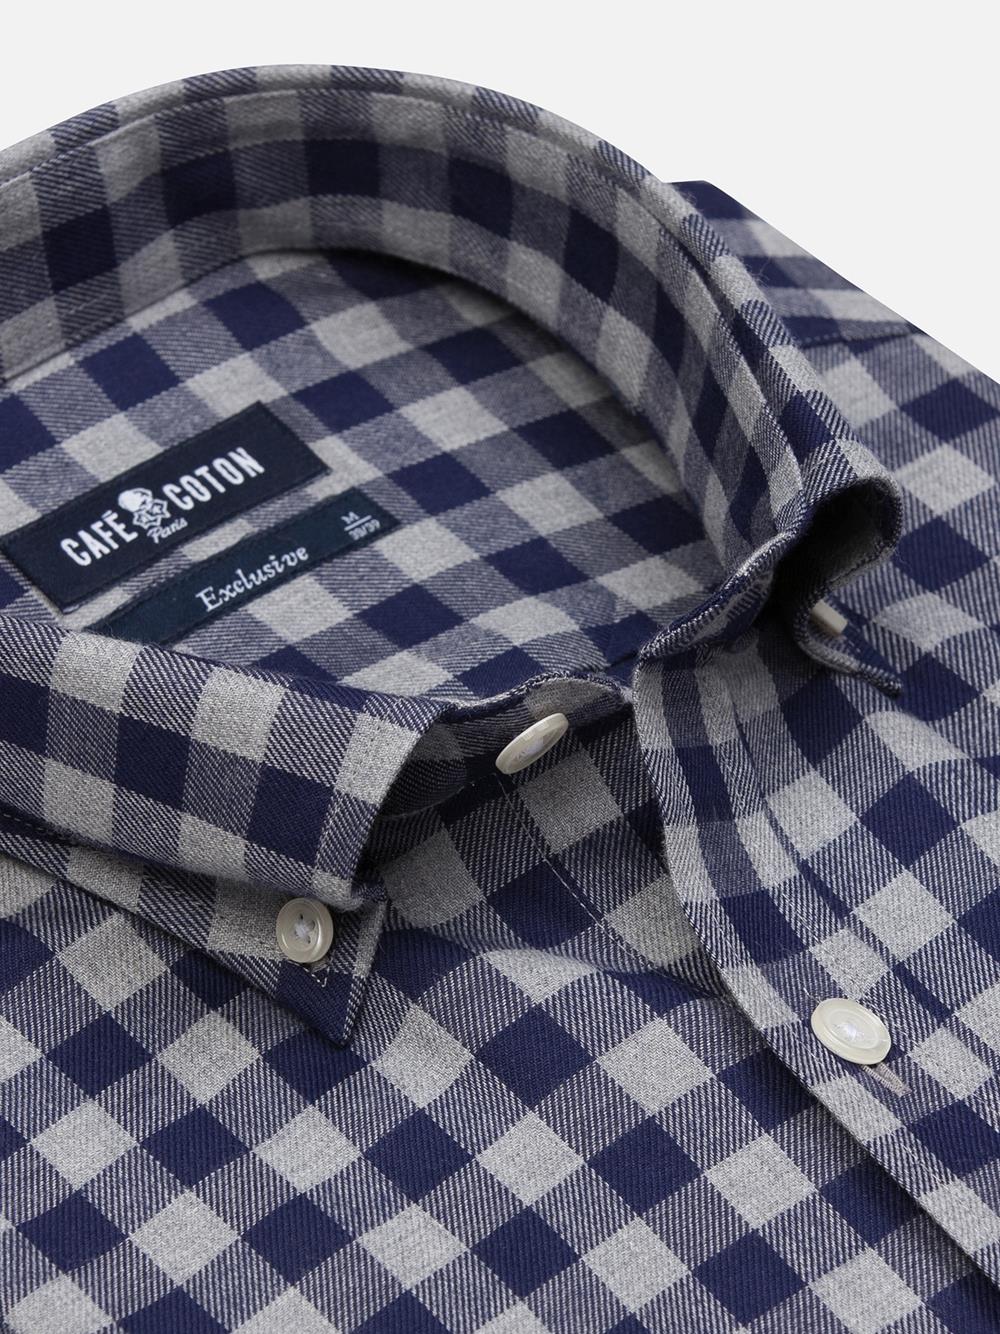 Wrighley Flanel Ruitjeshemd - Button-down kraag